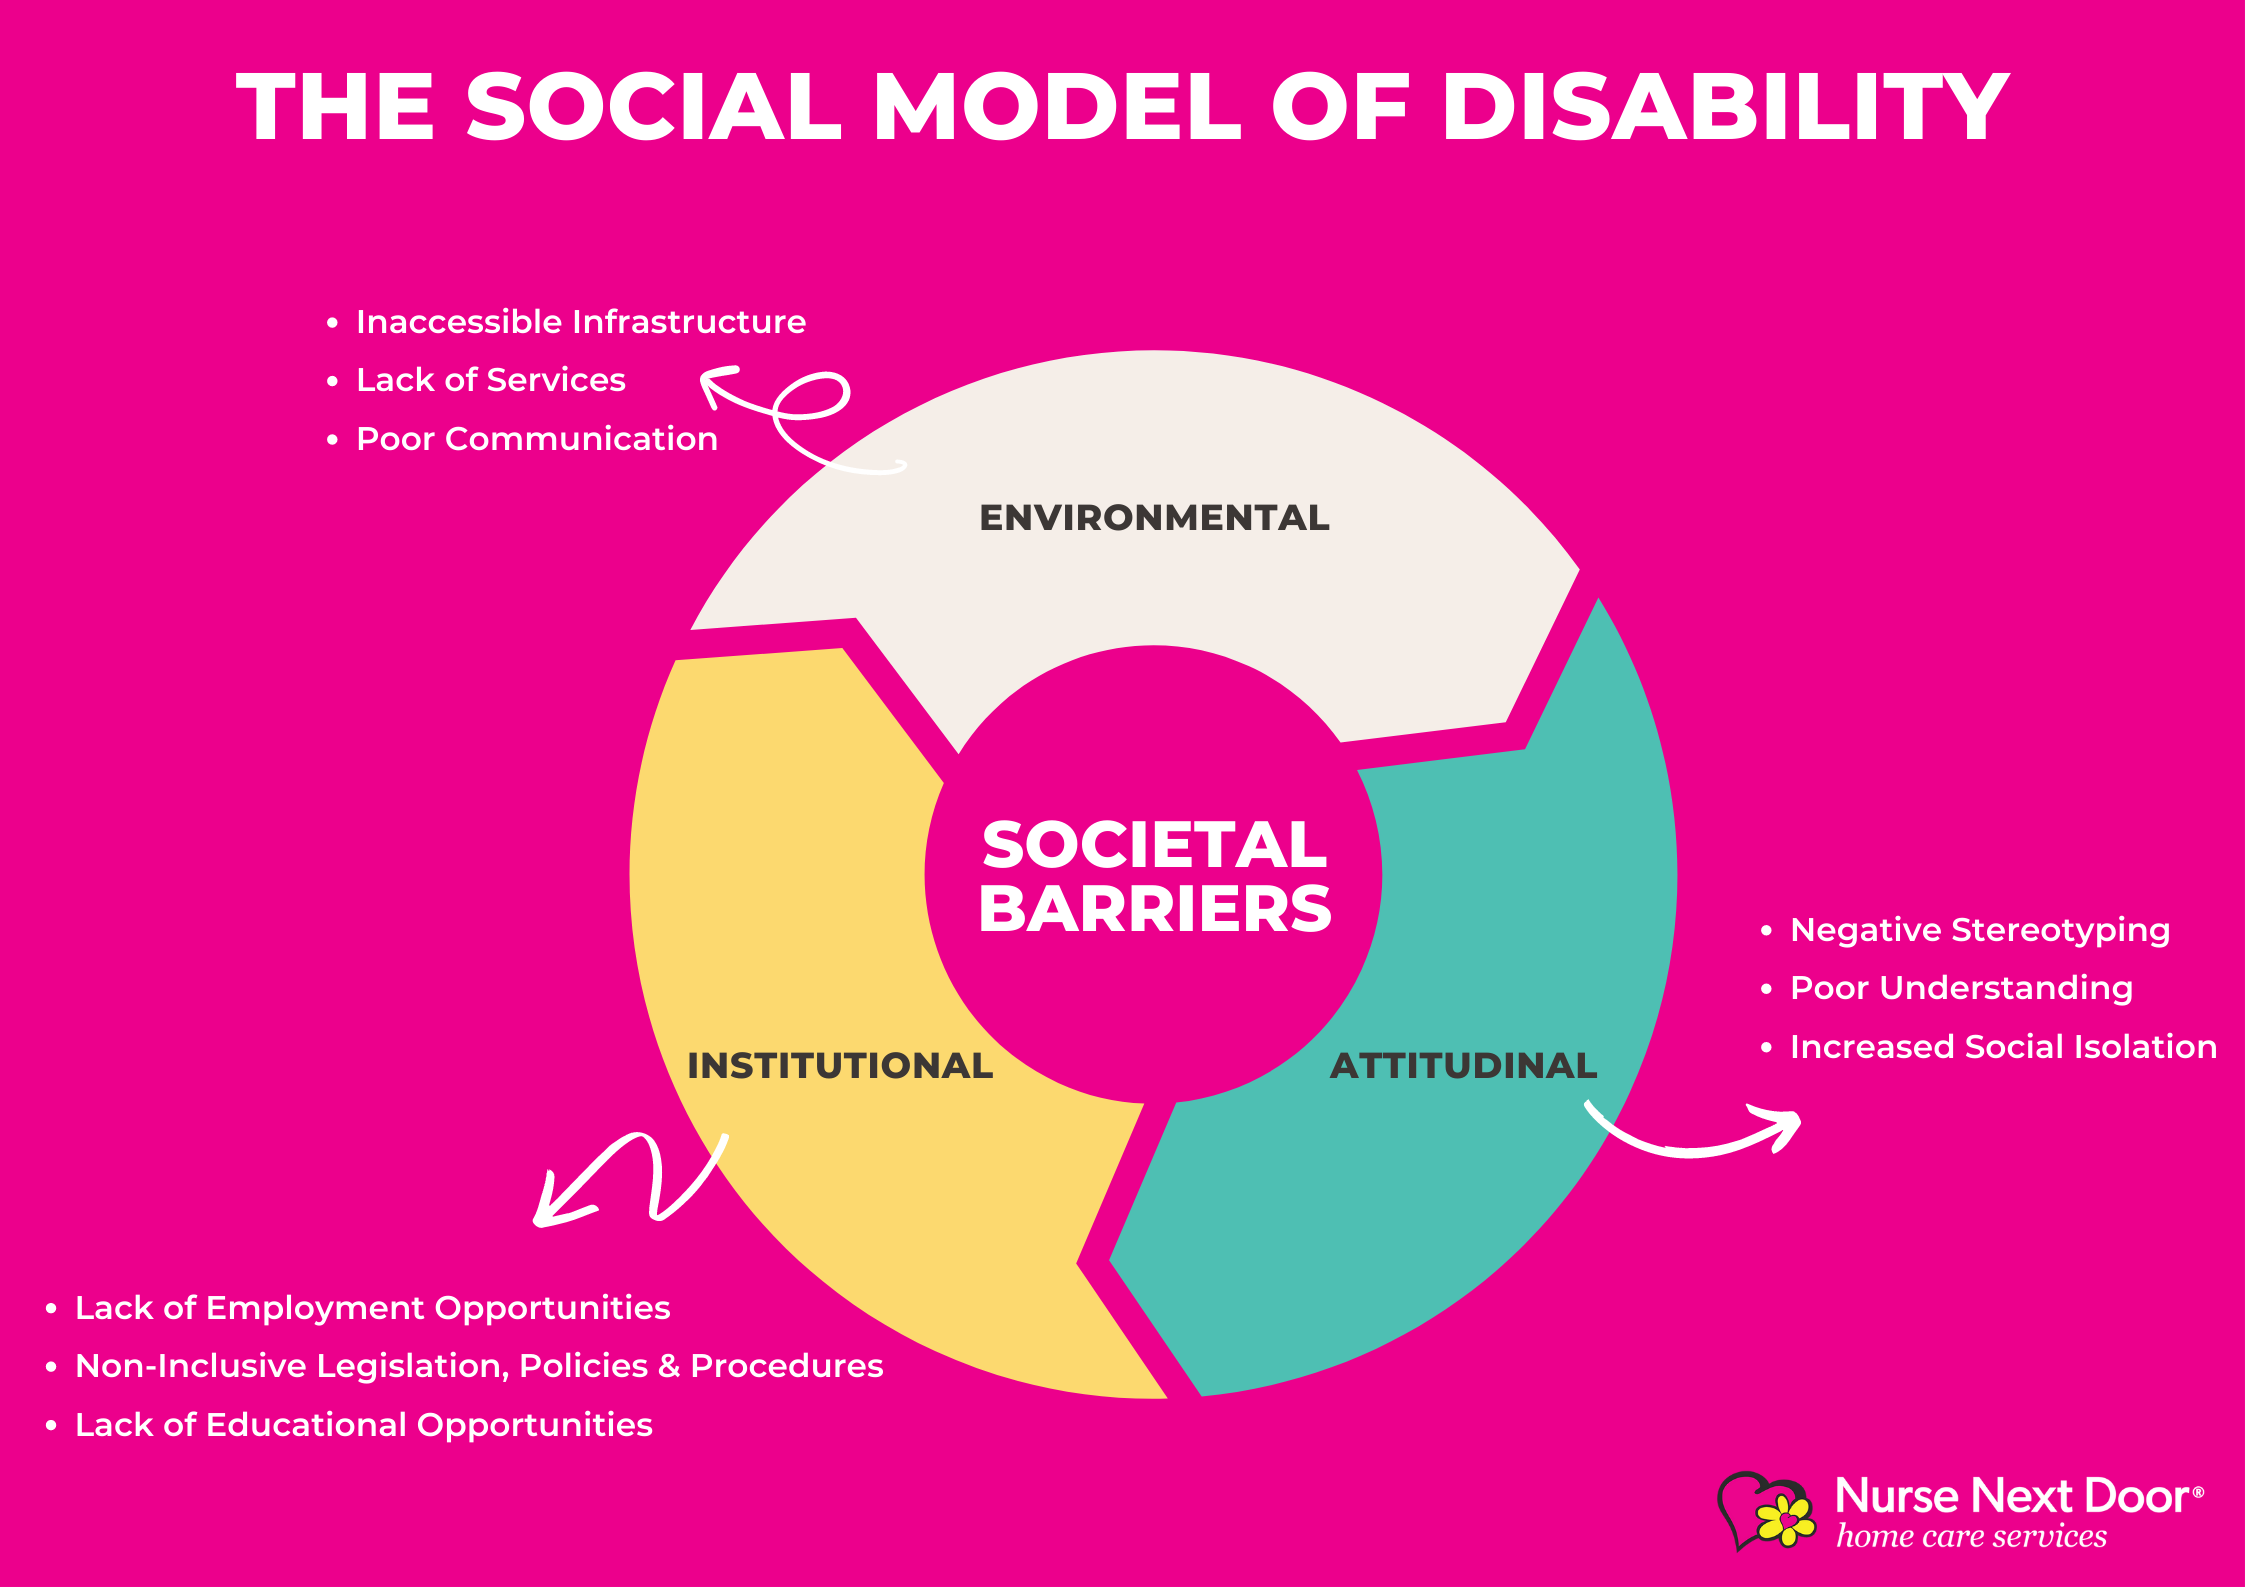 accessible tourism social model of disability